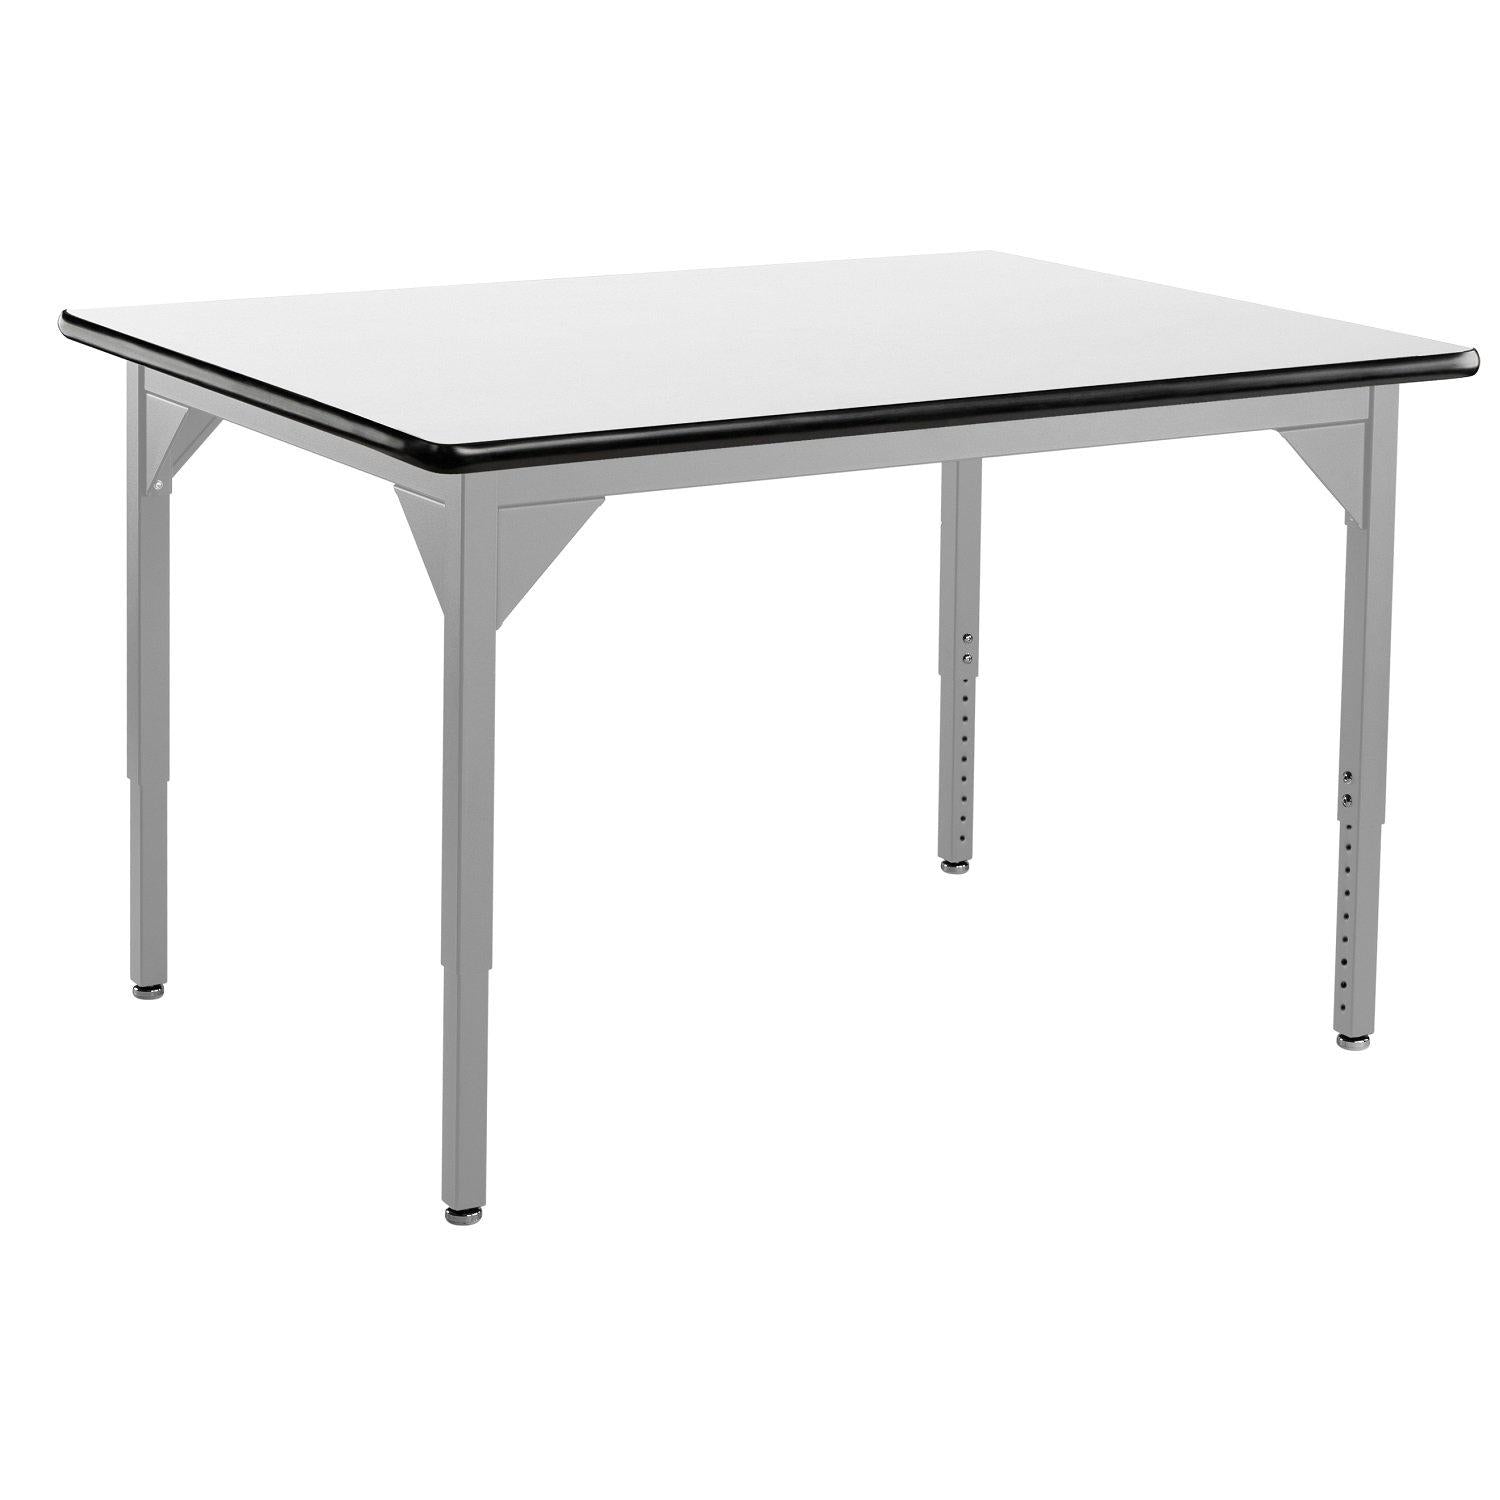 Heavy-Duty Height-Adjustable Utility Table, Soft Grey Frame, 36" x 60", Whiteboard High-Pressure Laminate Top